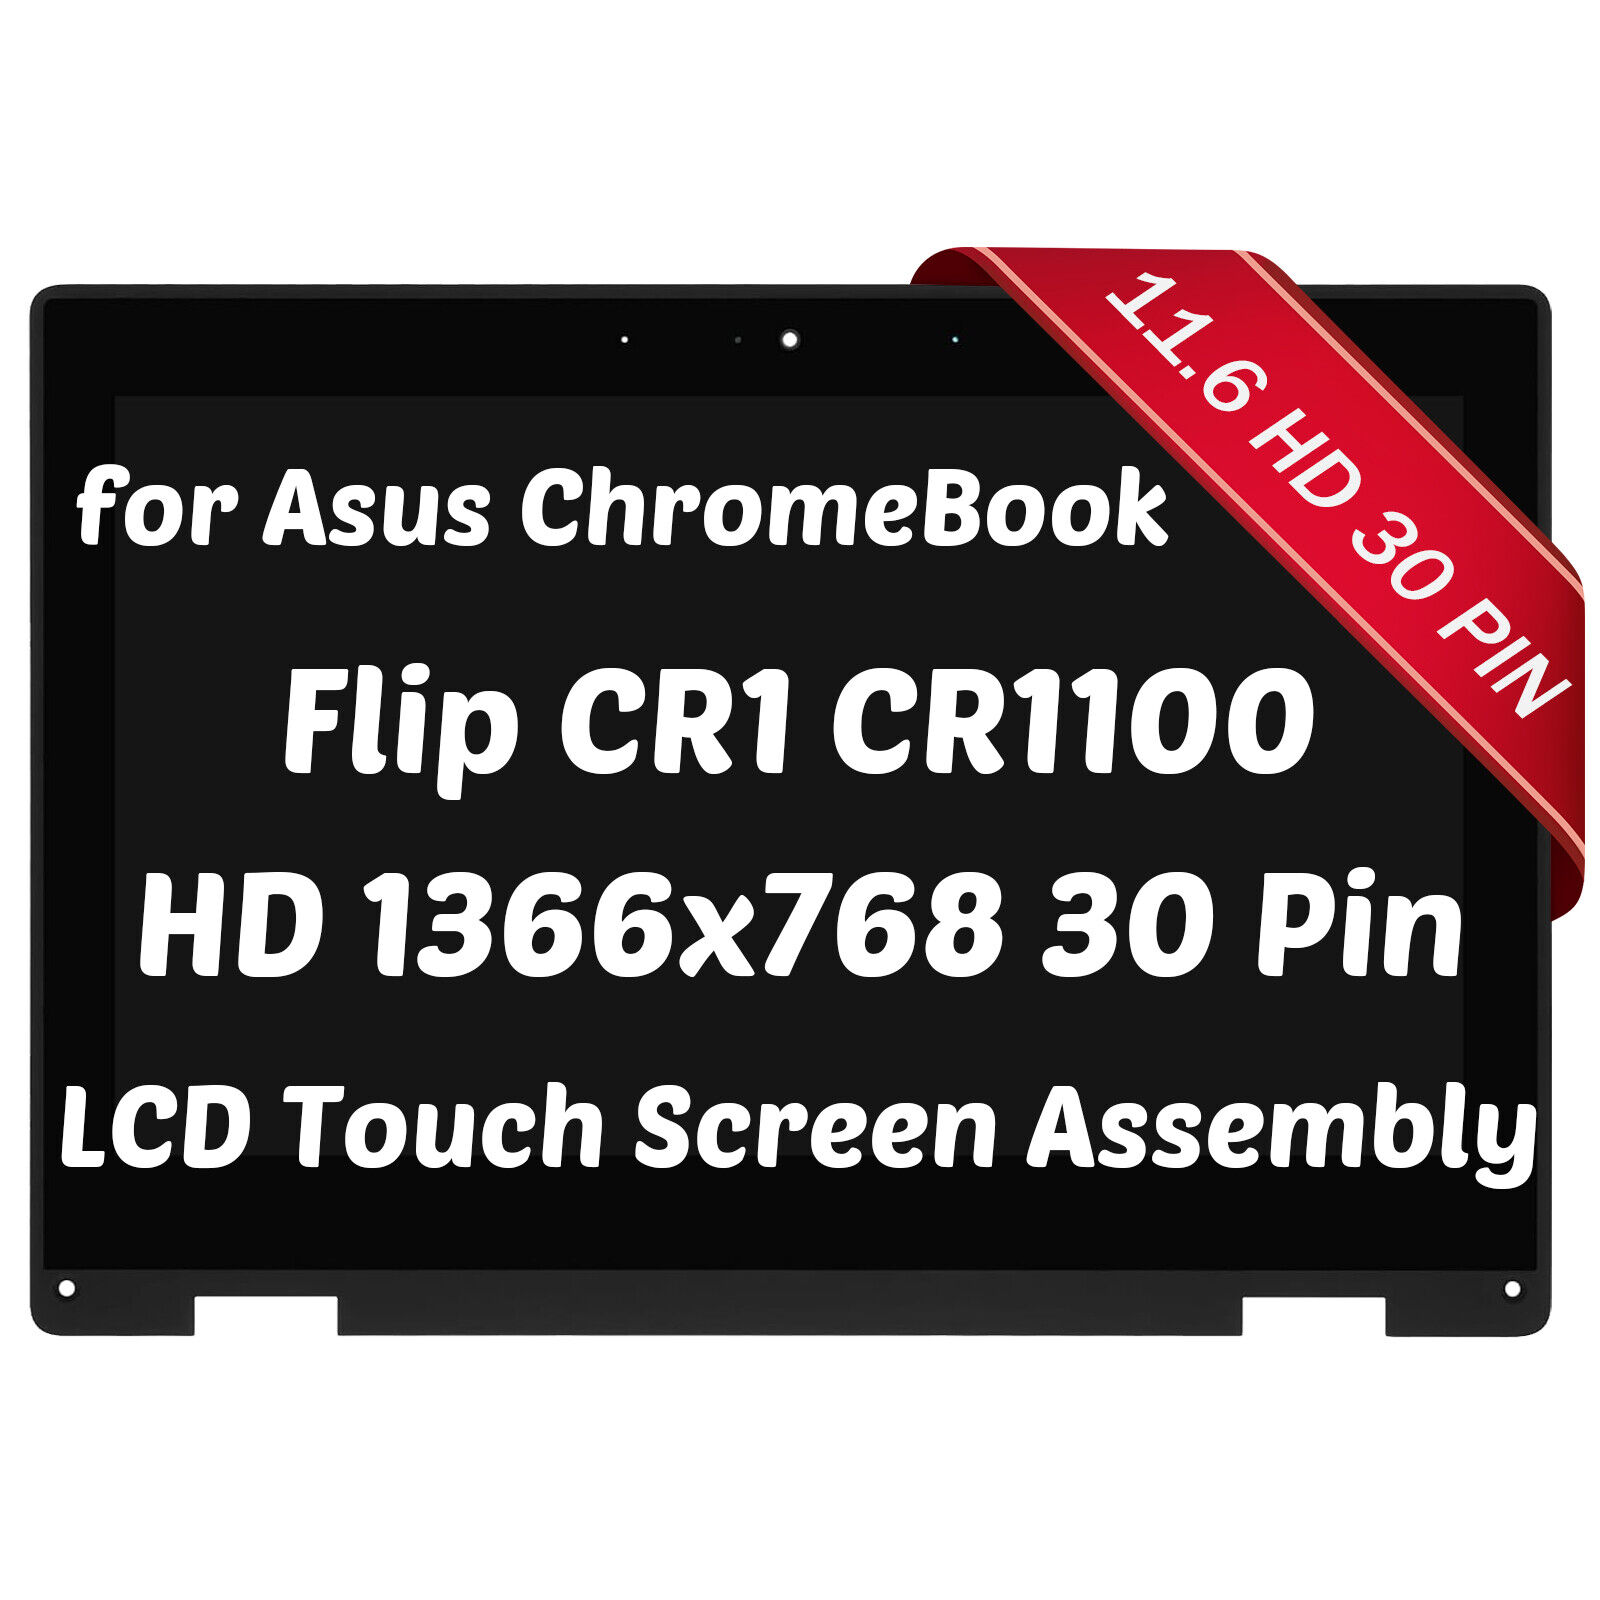 for ASUS Chromebook Flip CR1 CR1100CKA-GJ0013 LCD Touch Screen Display Assembly